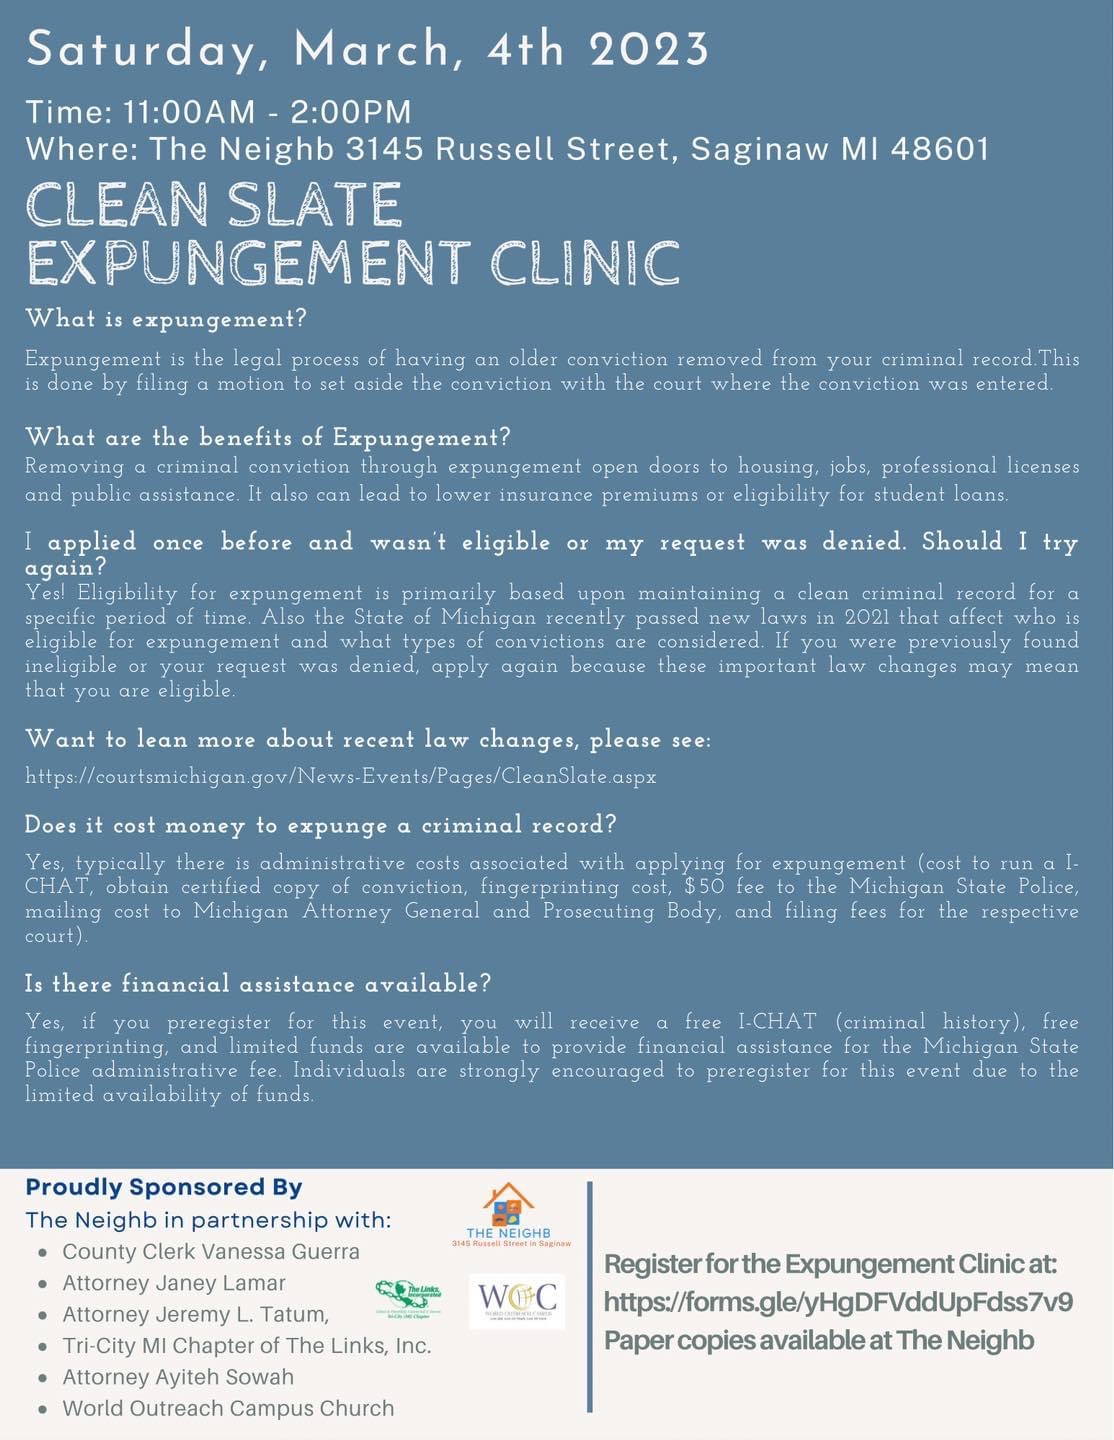 <h1 class="tribe-events-single-event-title">Clean Slate Expungement Clinic</h1>